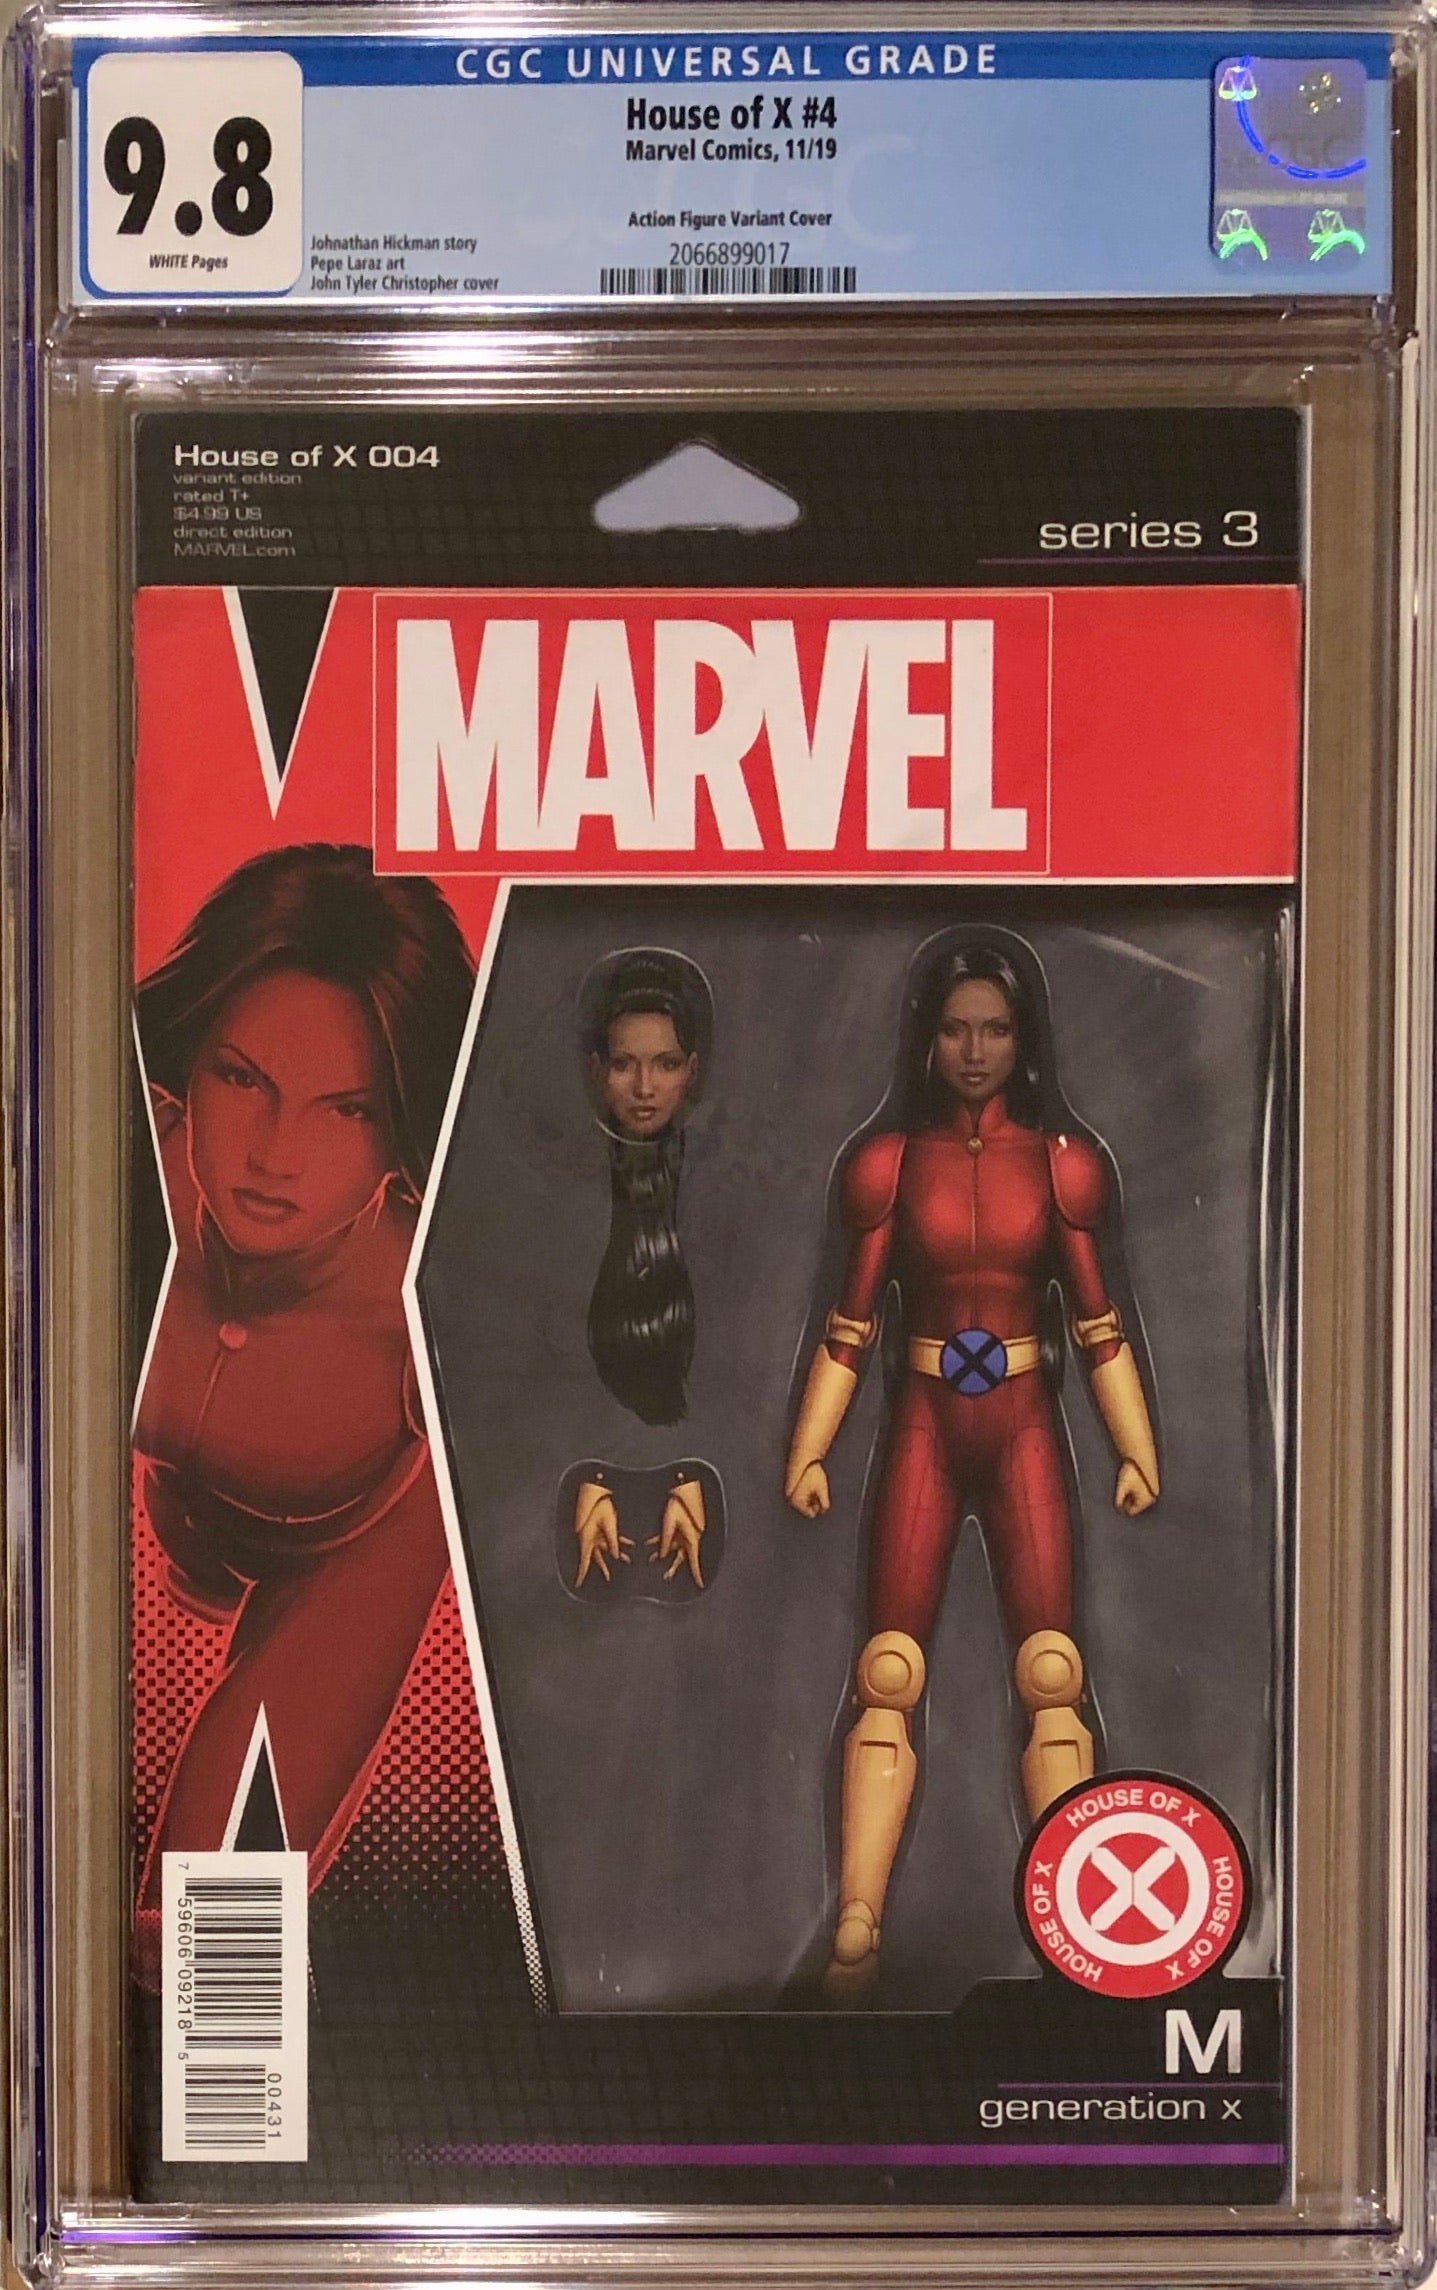 House of X #4 Action Figure Variant CGC 9.8